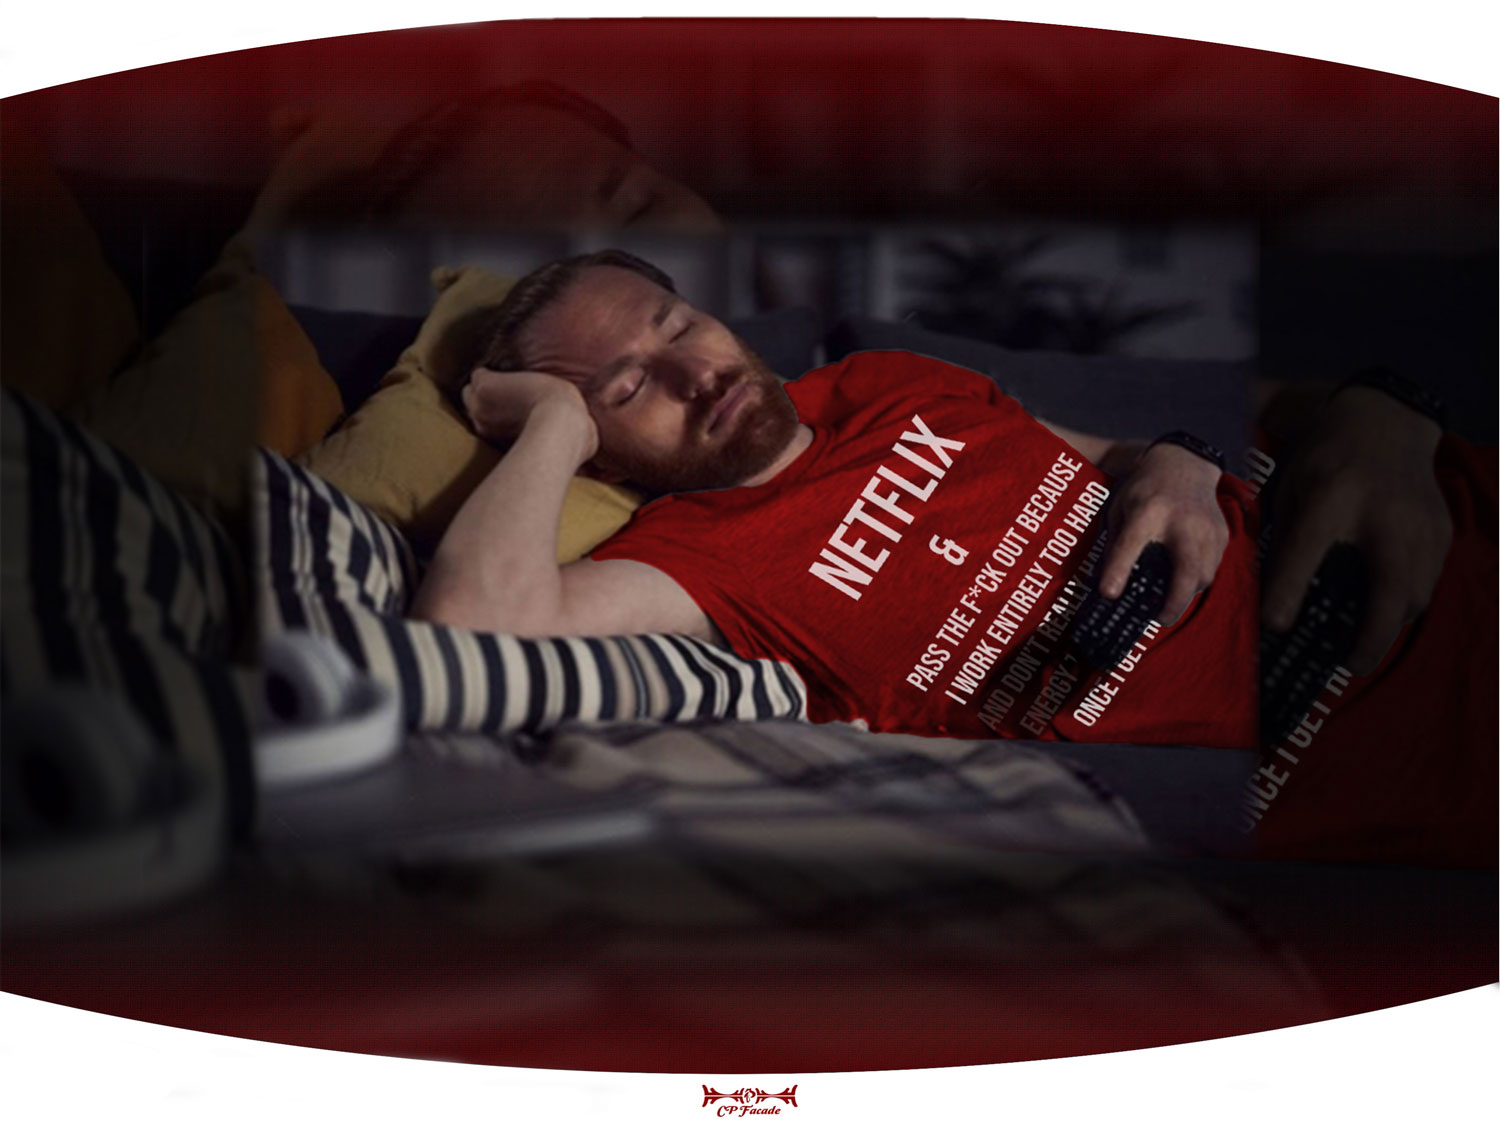 Guy passed out holding tv remote while wearing red Netflix and chill t-shirt with funny text on the front of it.